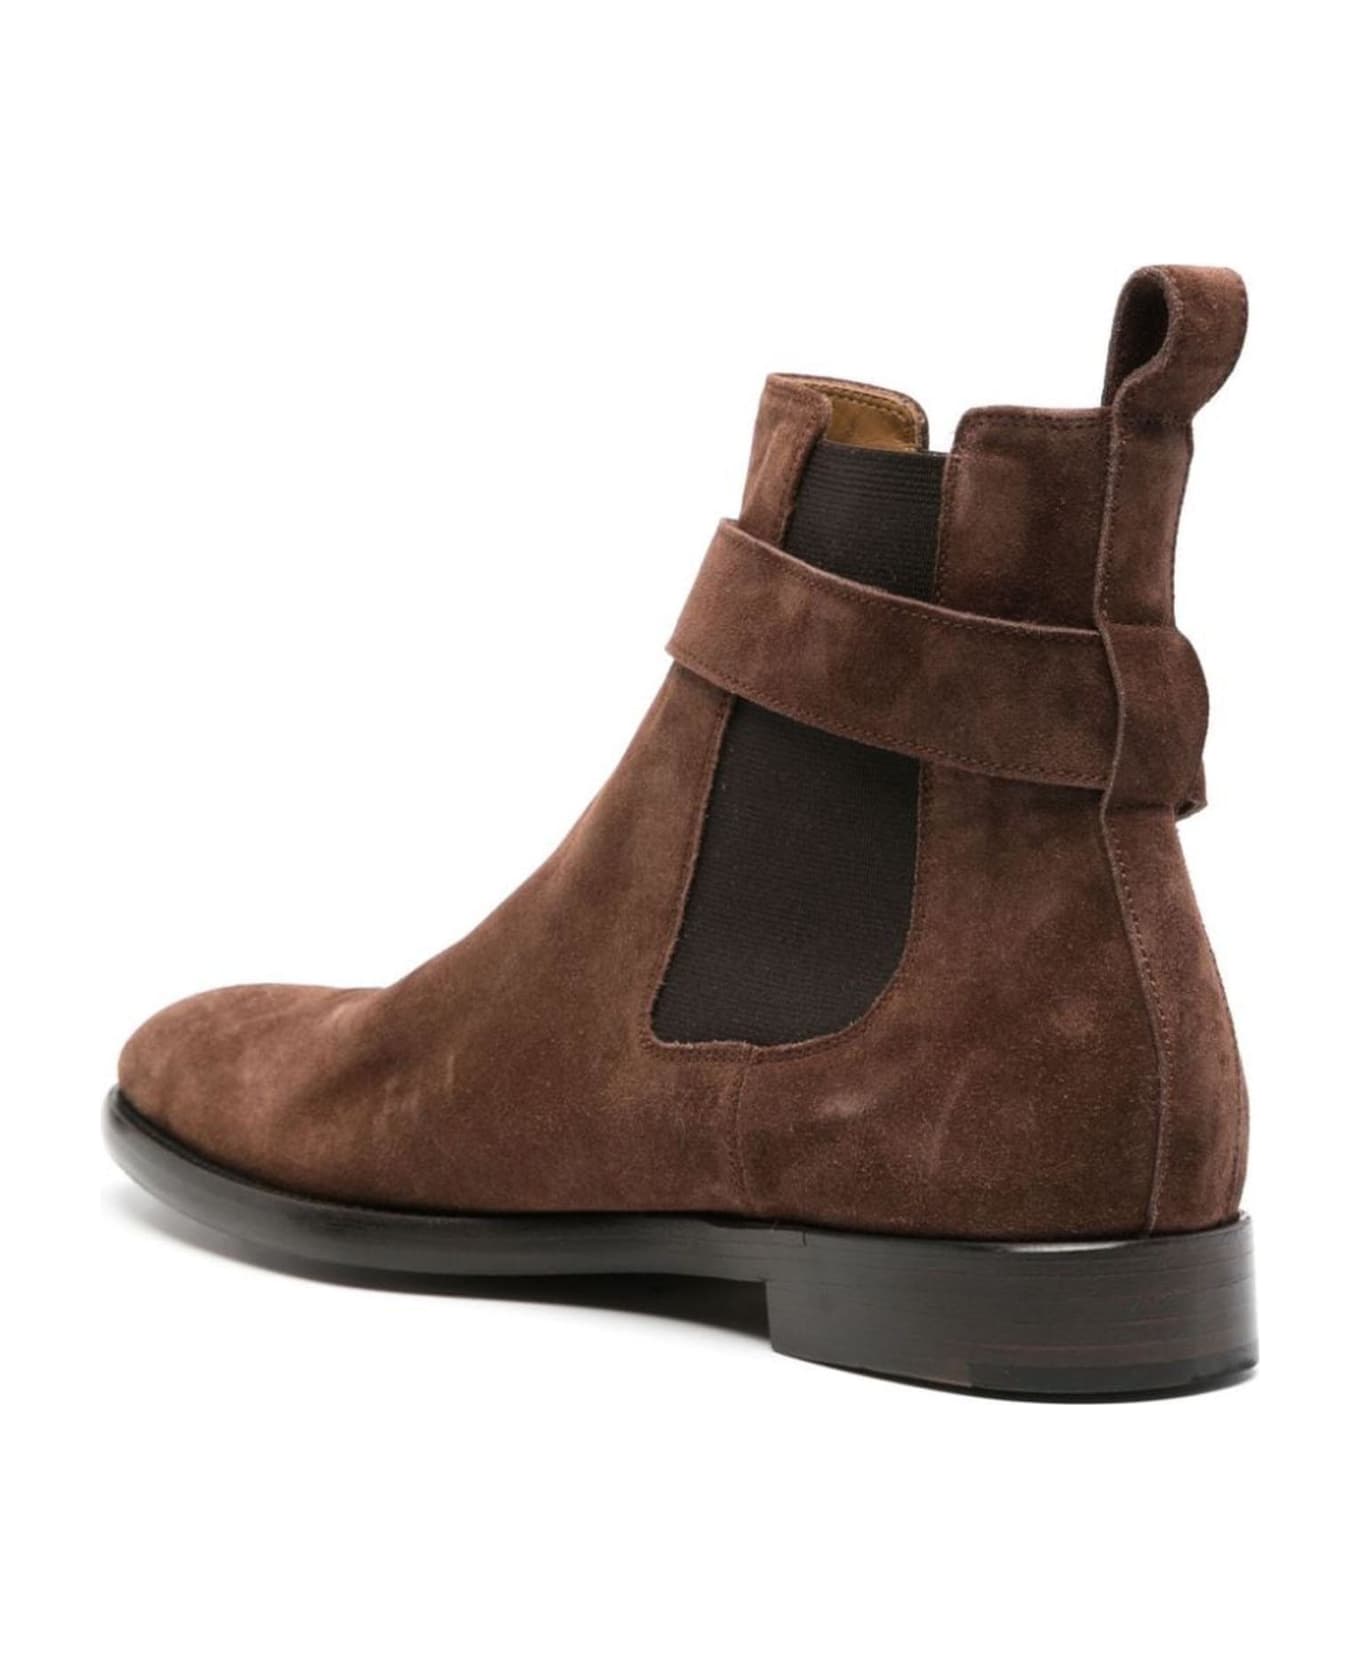 Edhen Milano Brown Suede Ankle Boots - Marrone